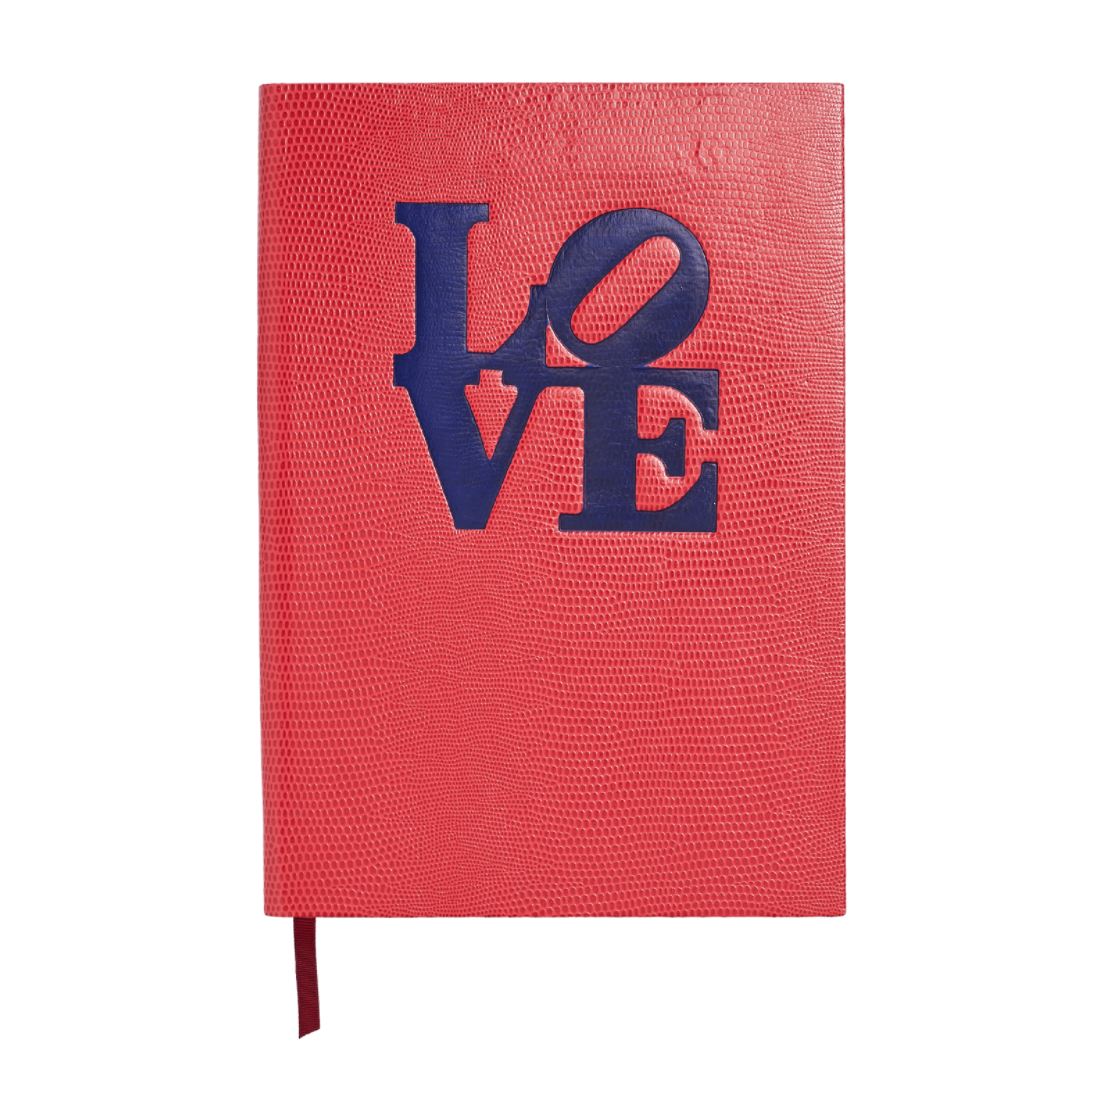 LOVE Journal Journals Sloane Stationery Red 